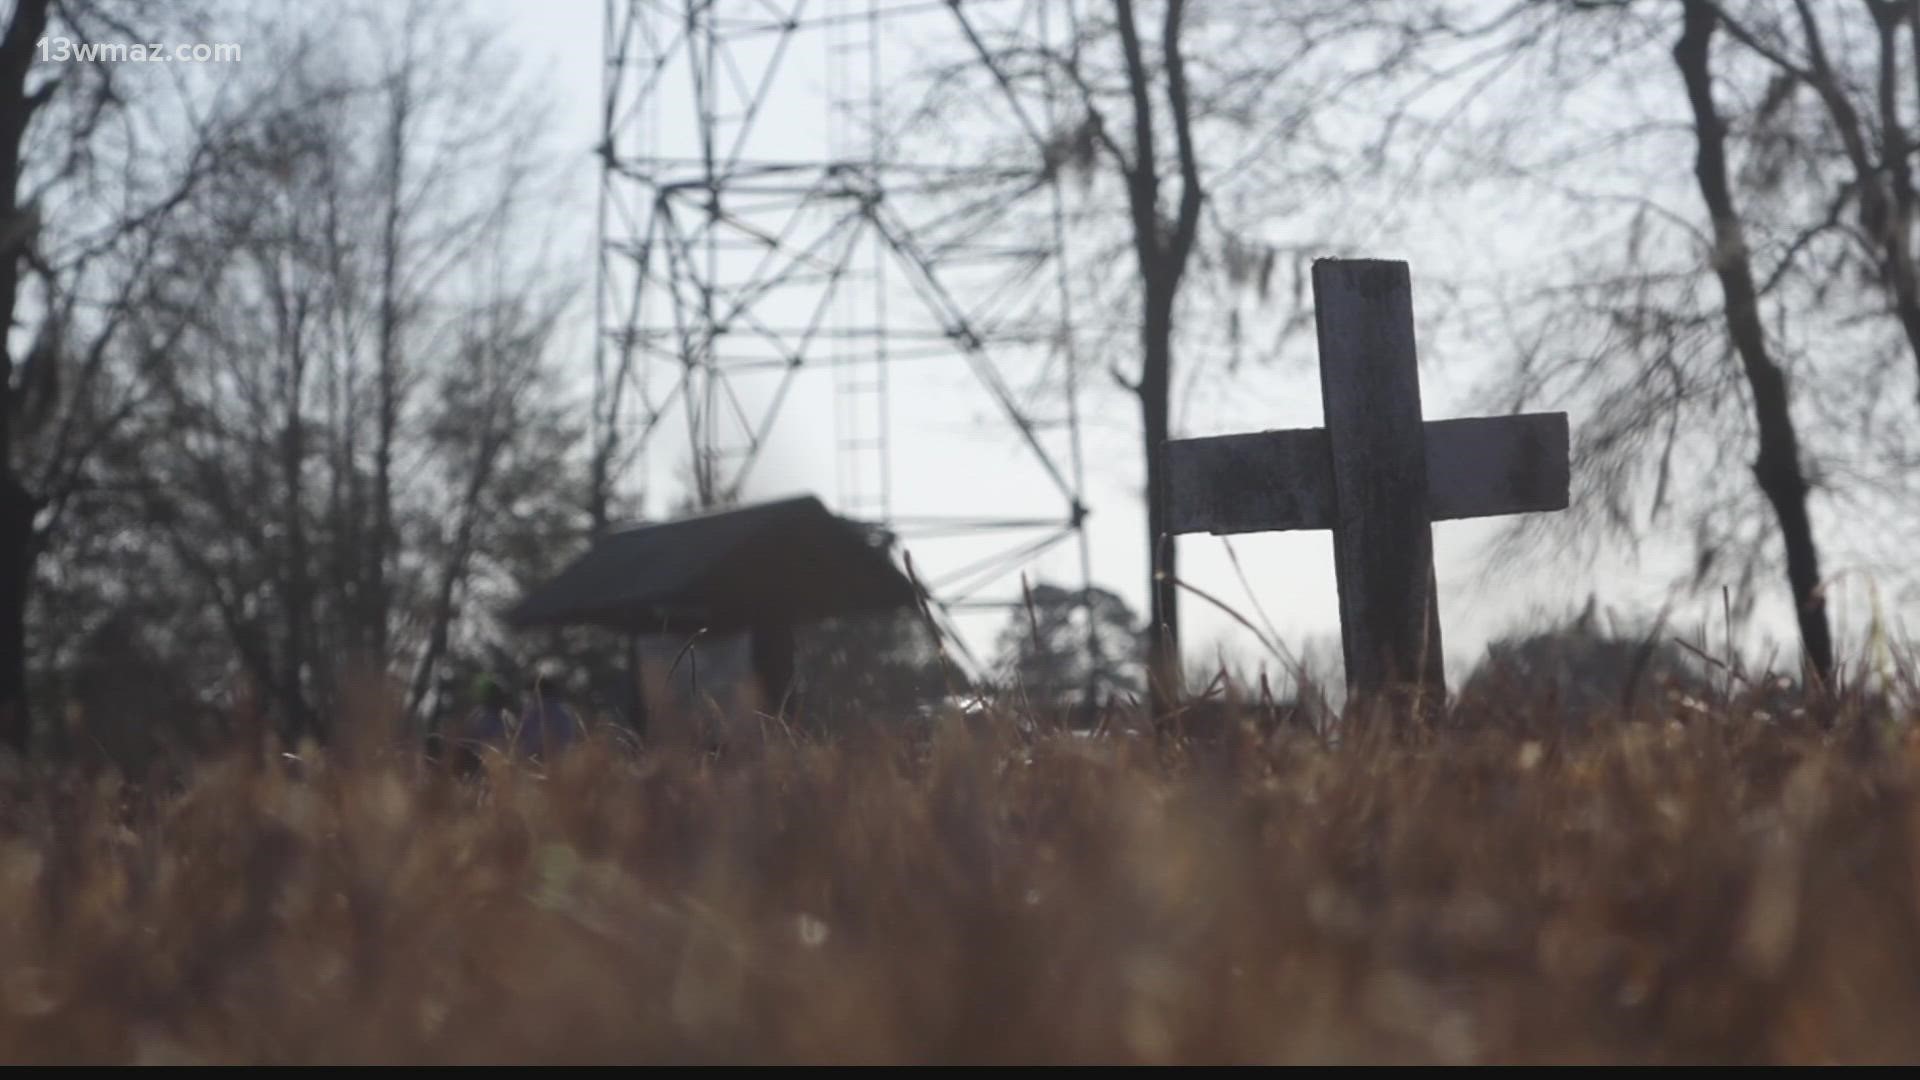 The Emerald City is working on restoring an all Black cemetery.